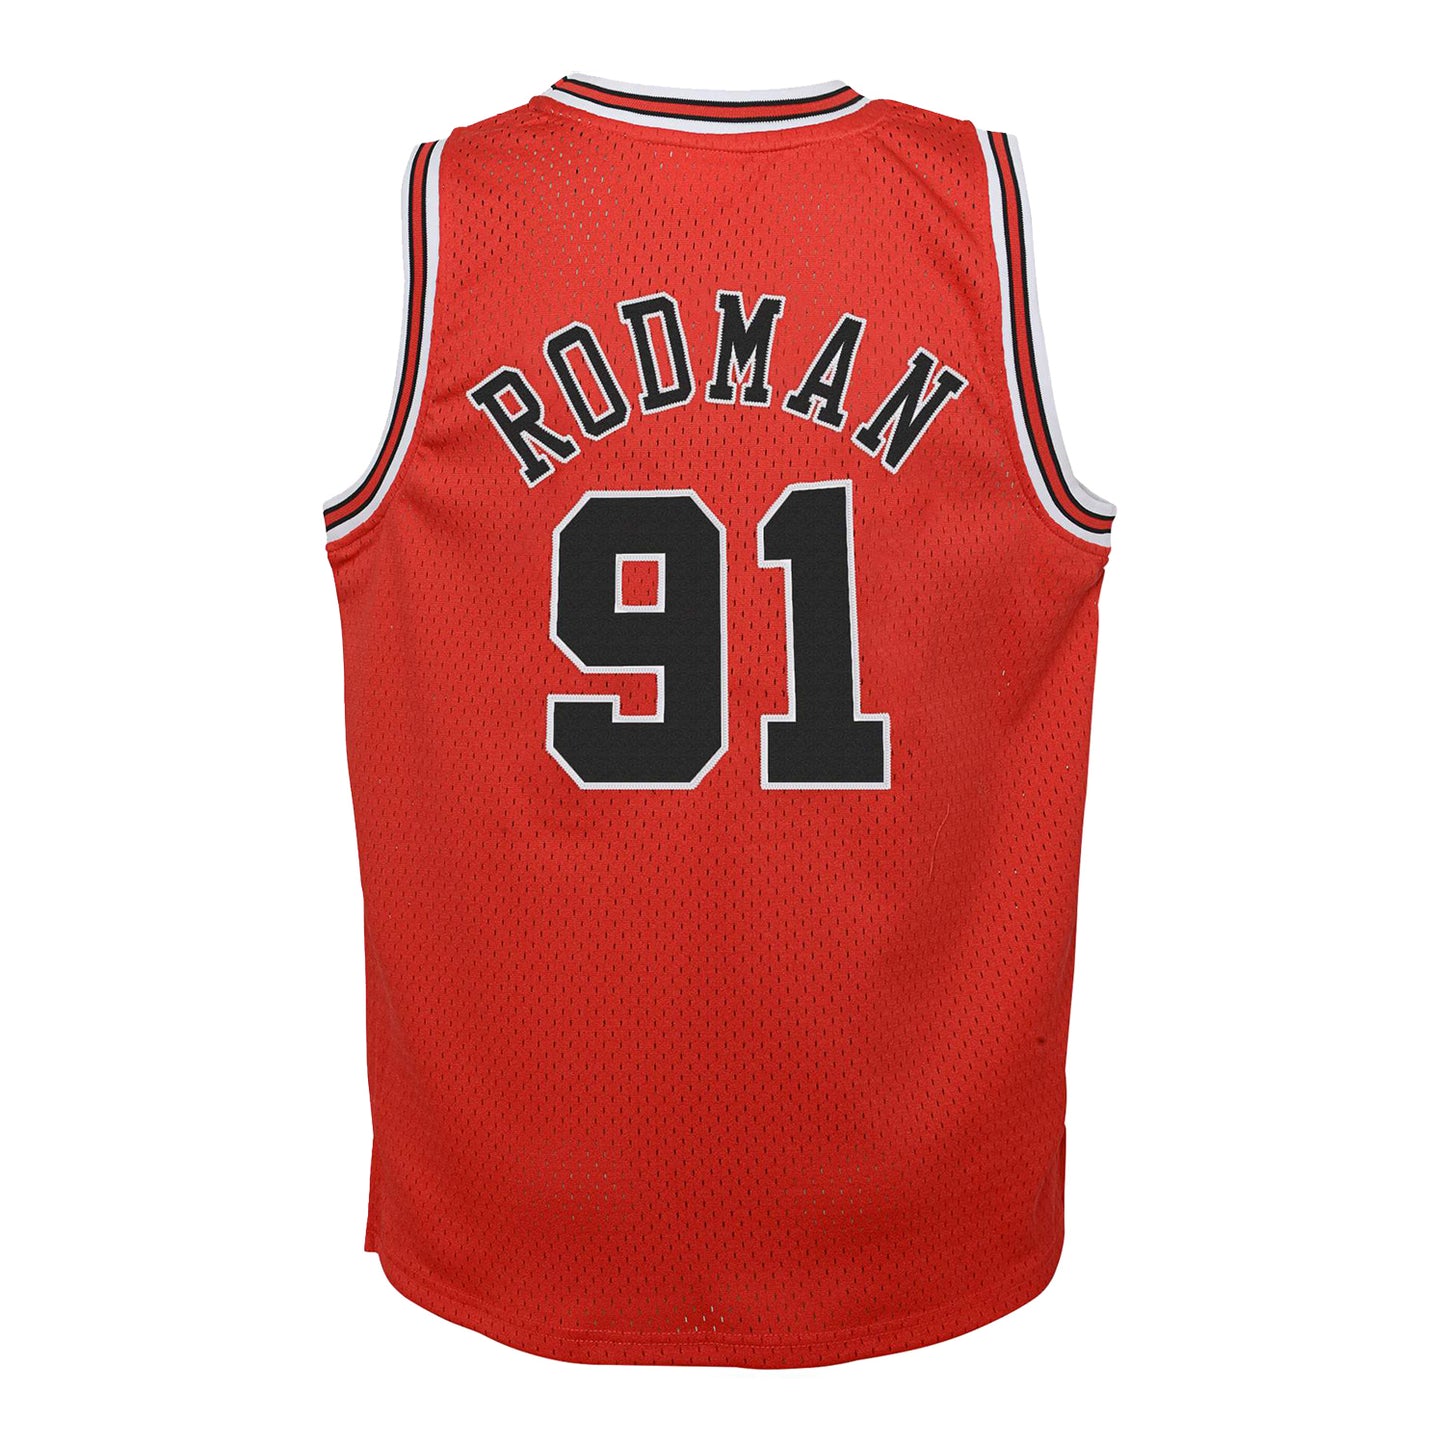 Youth Chicago Bulls Authentic Mitchell & Ness Dennis Rodman 1997-98 Jersey in red - back view